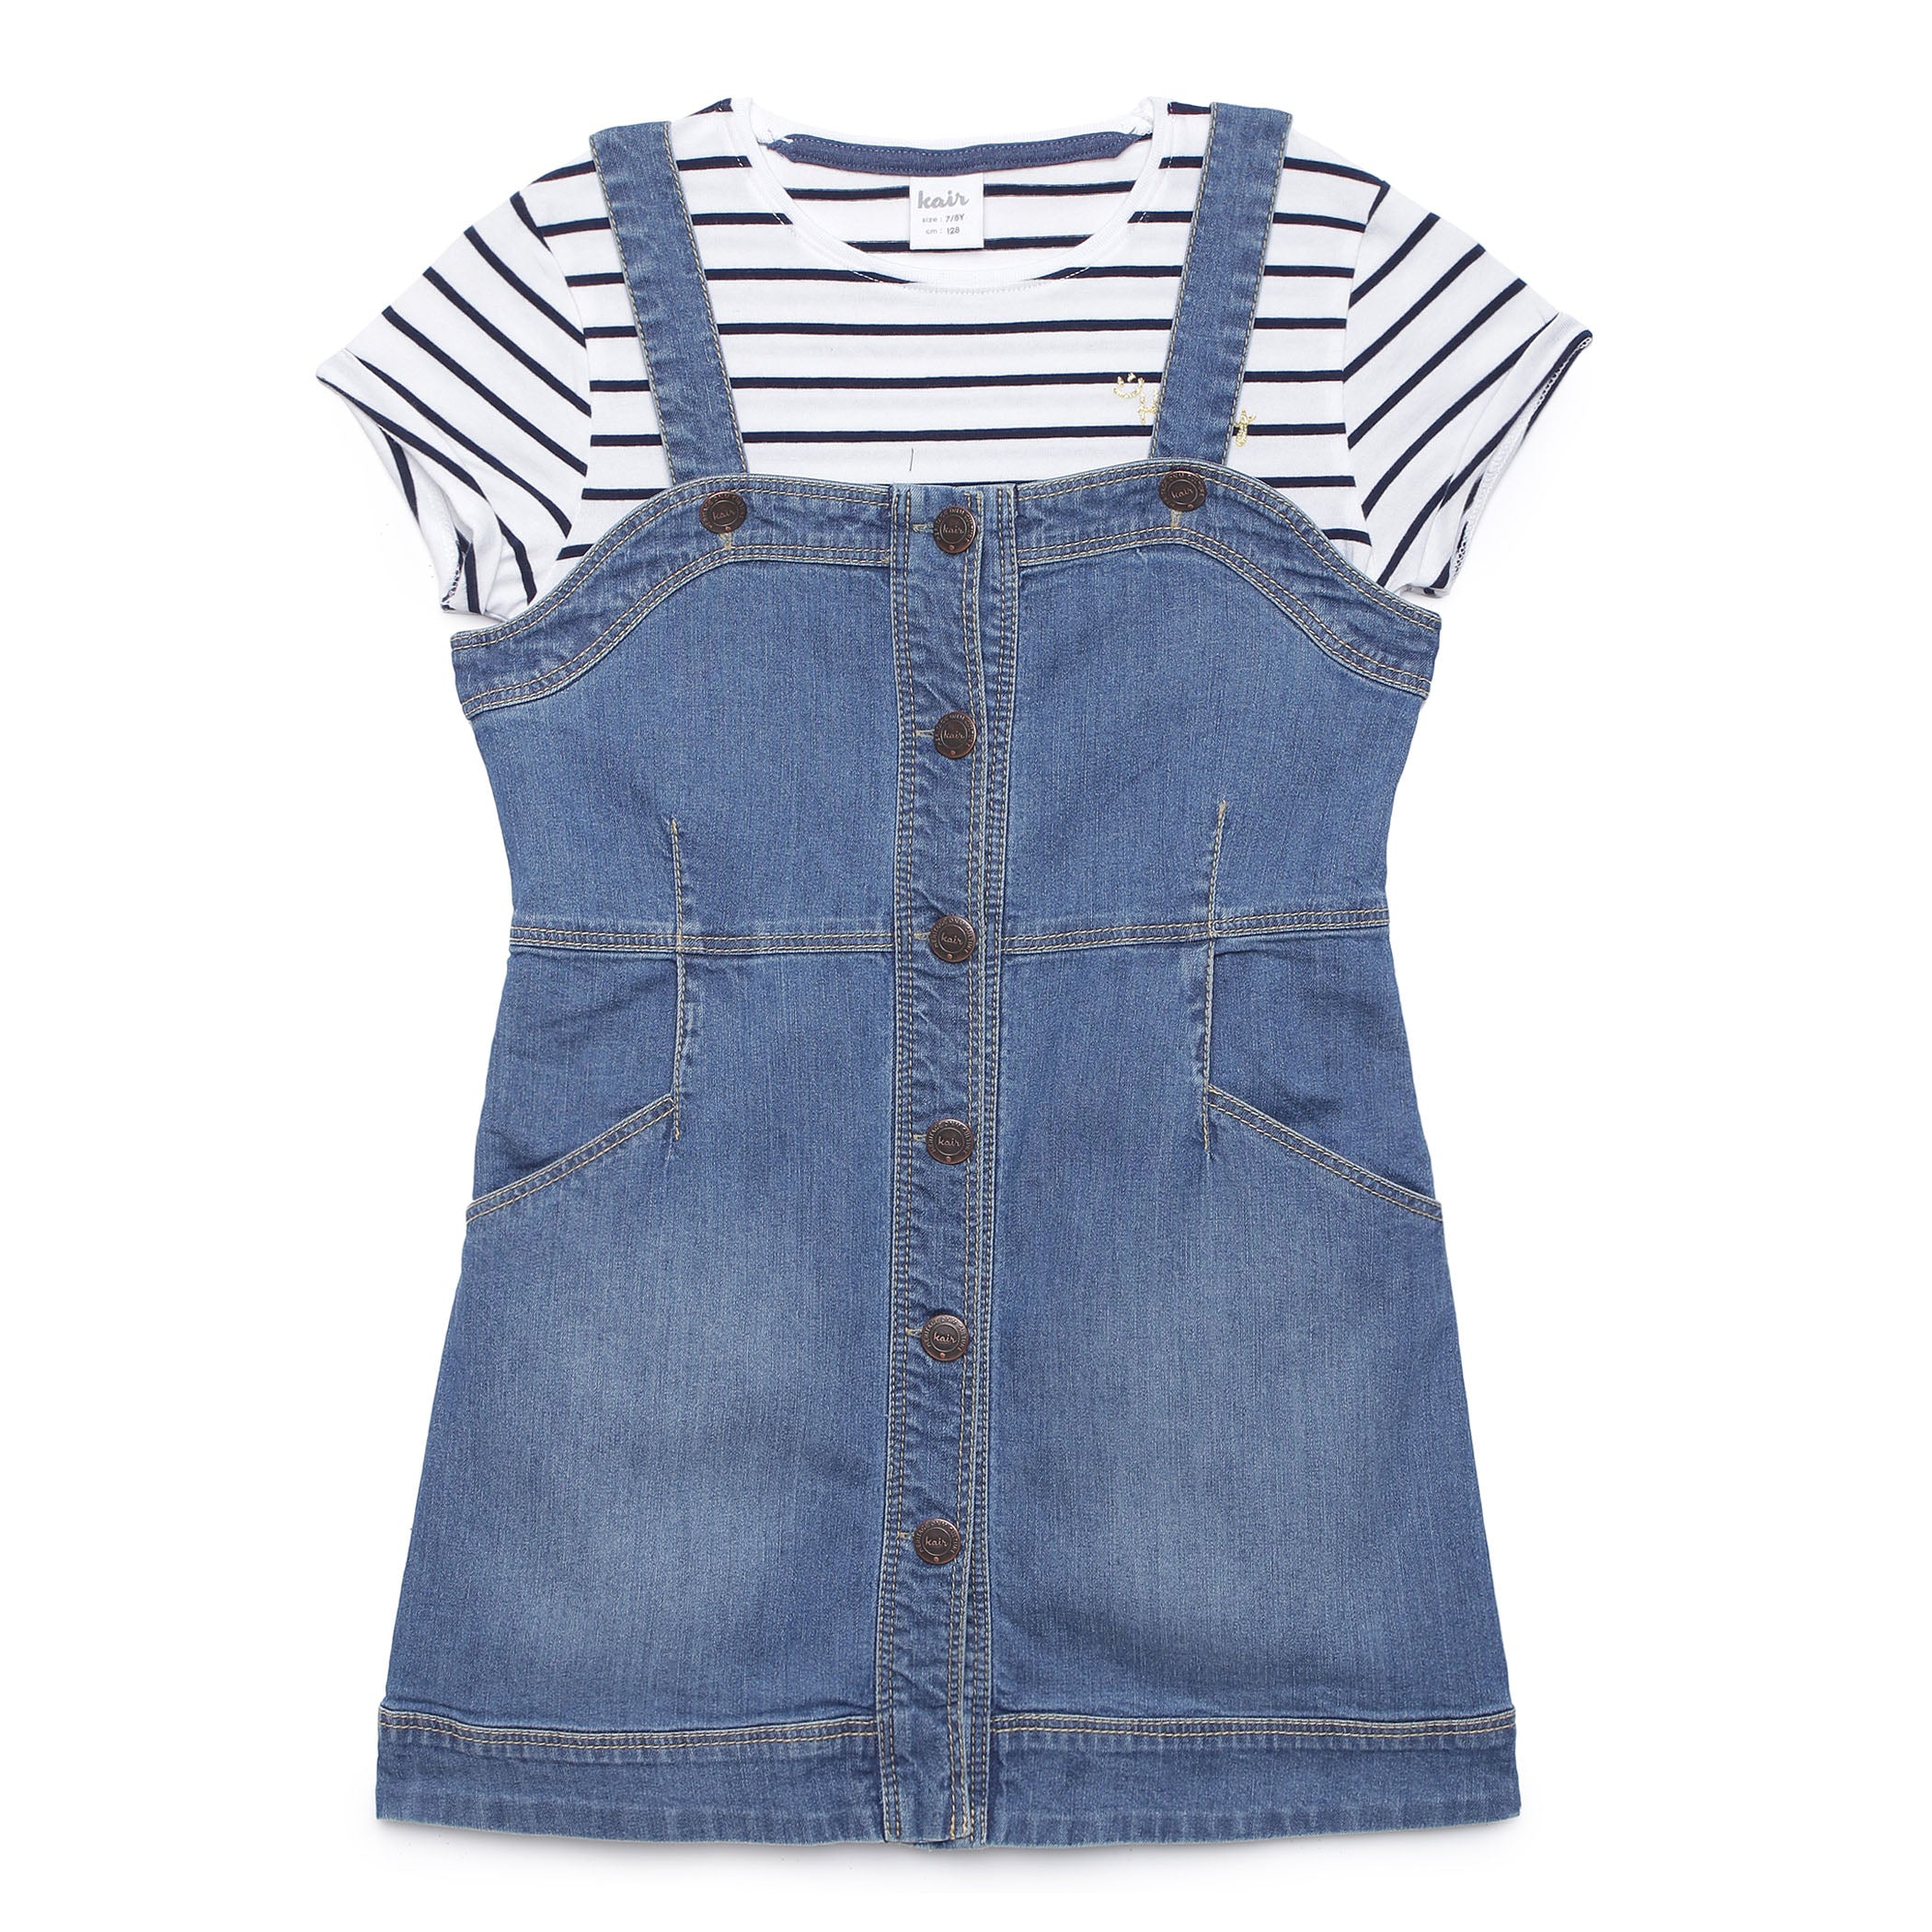 Buttoned Pinafore Mini Dress - Charcoal or Denim Blue - Just $7